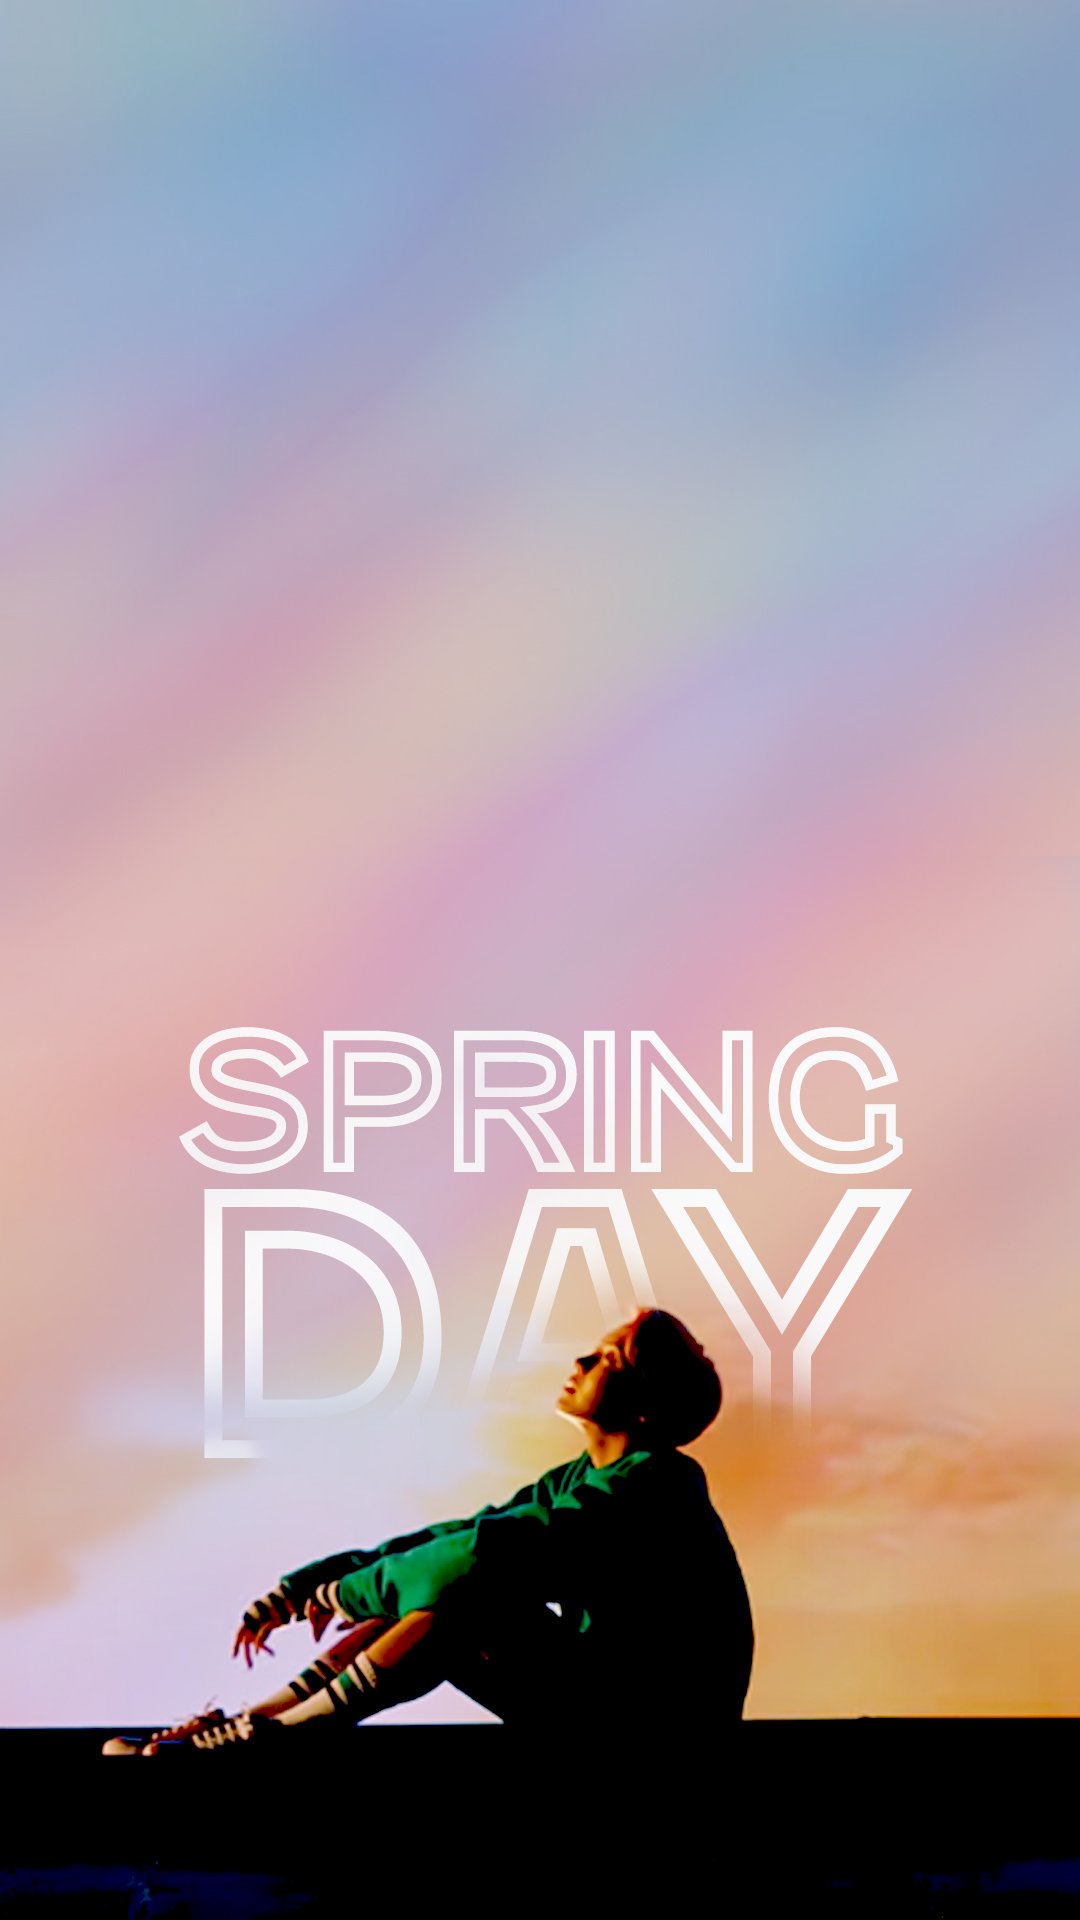 Bts Spring Day posted HD phone wallpaper | Pxfuel